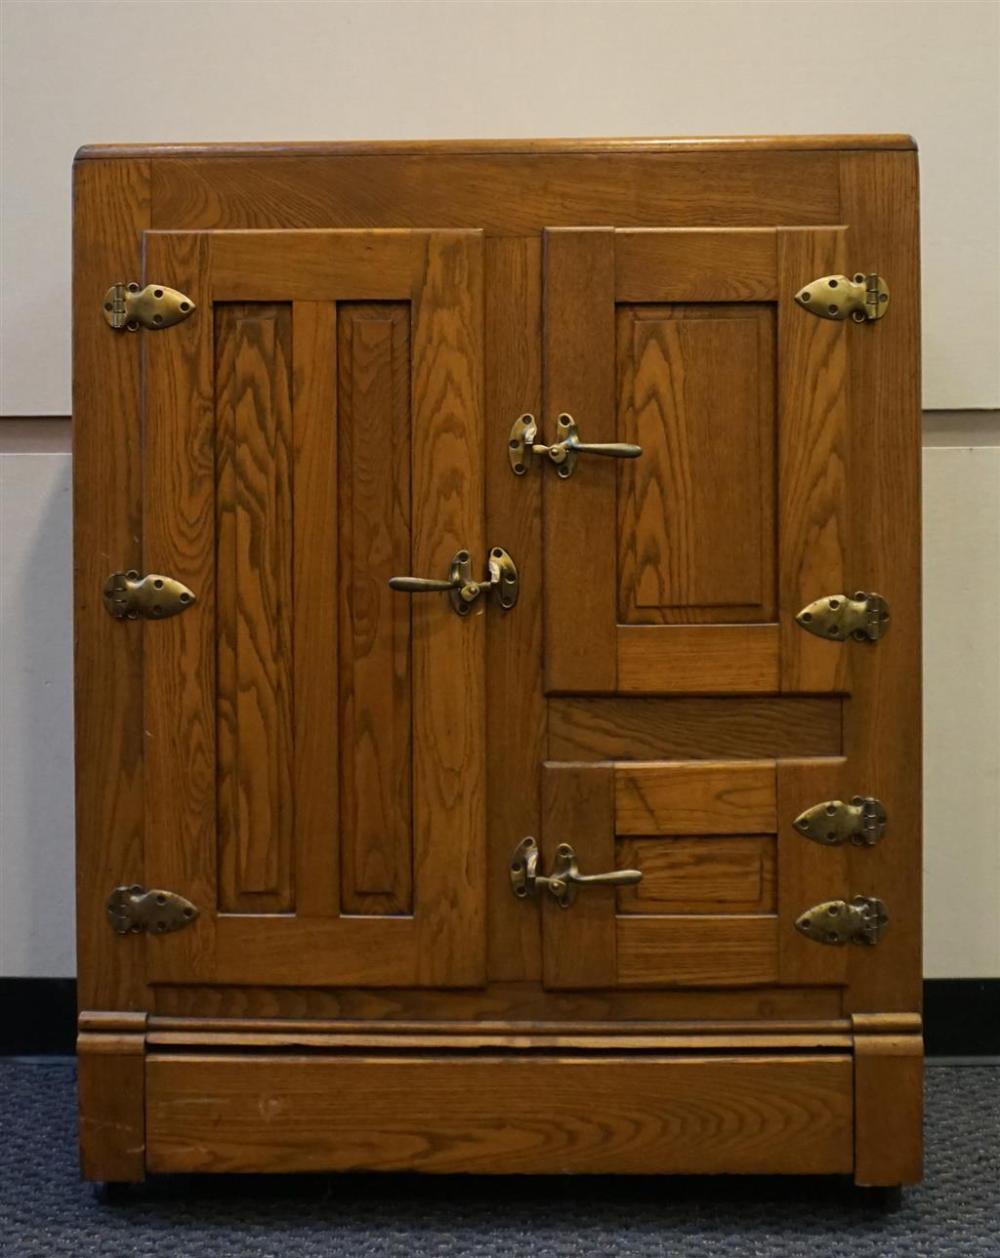 EARLY AMERICAN STYLE CHESTNUT ICEBOX  329c61